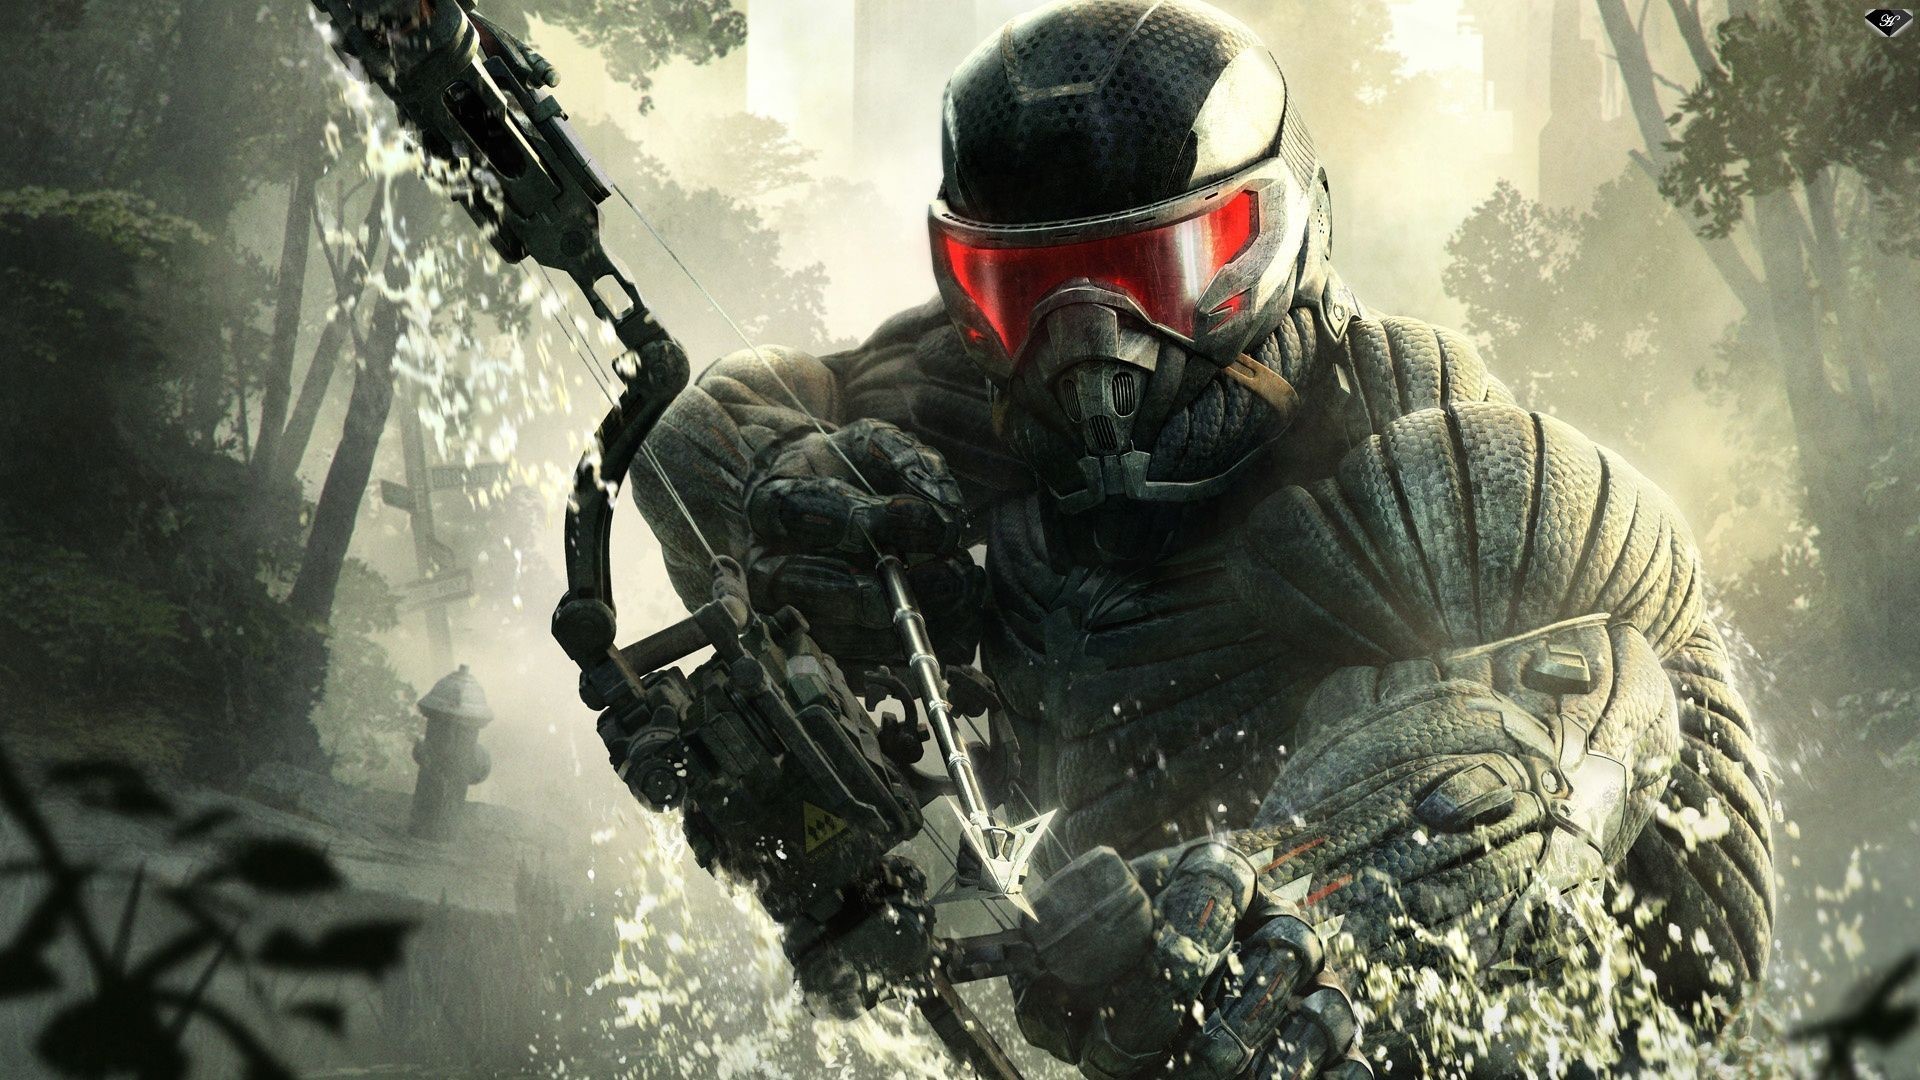 1920x1080 Crysis 3 Video Game Wallpapers